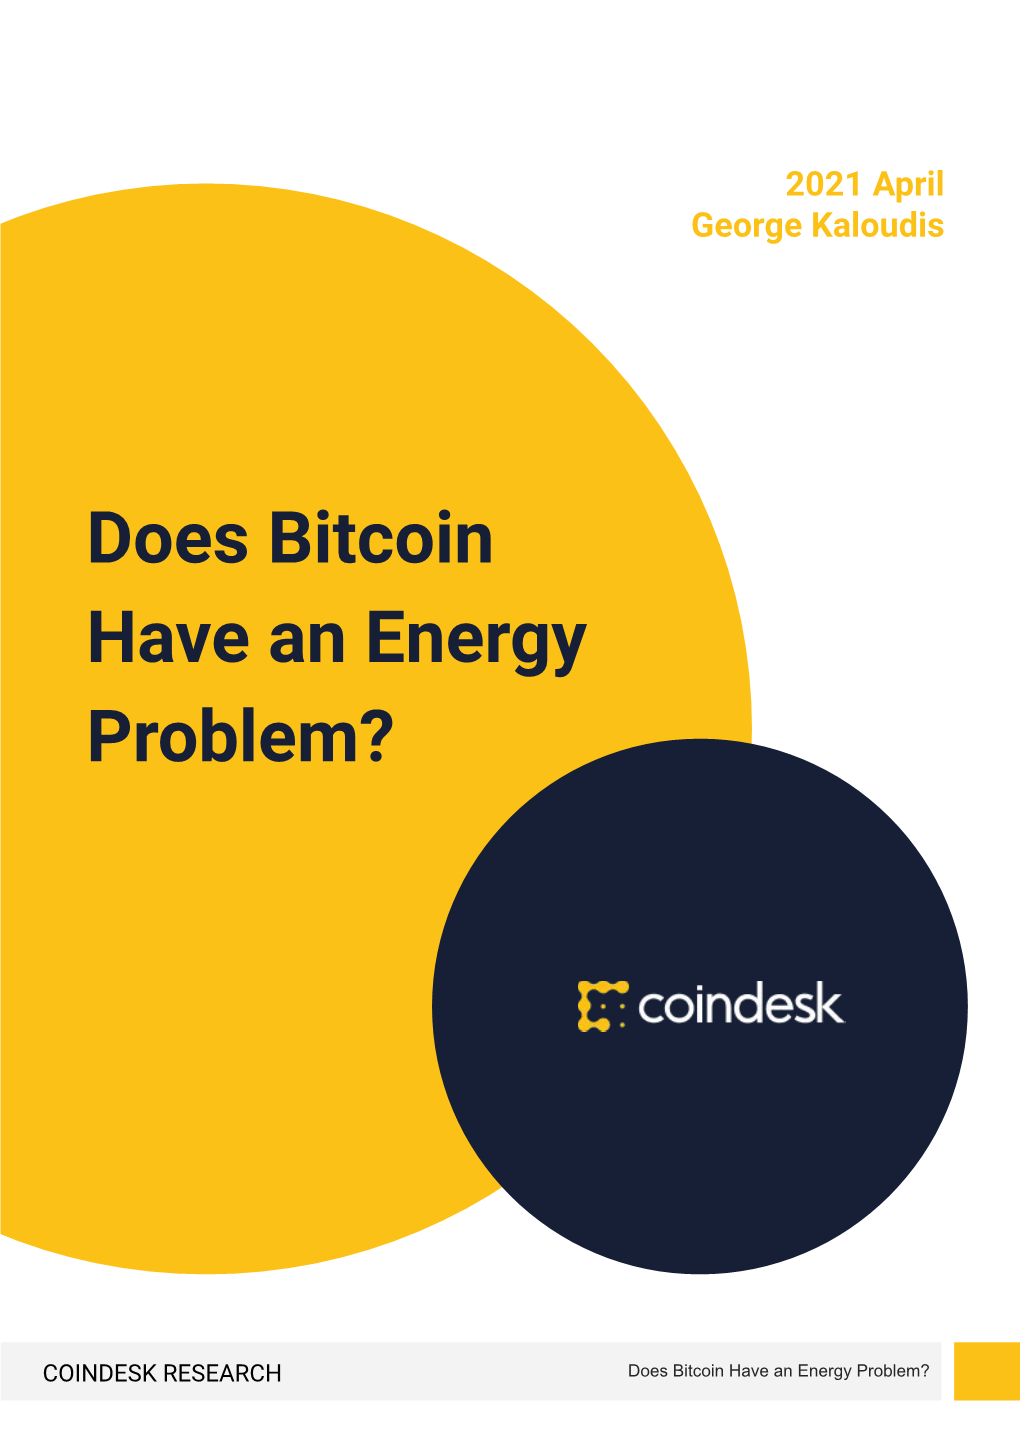 Does Bitcoin Have an Energy Problem?